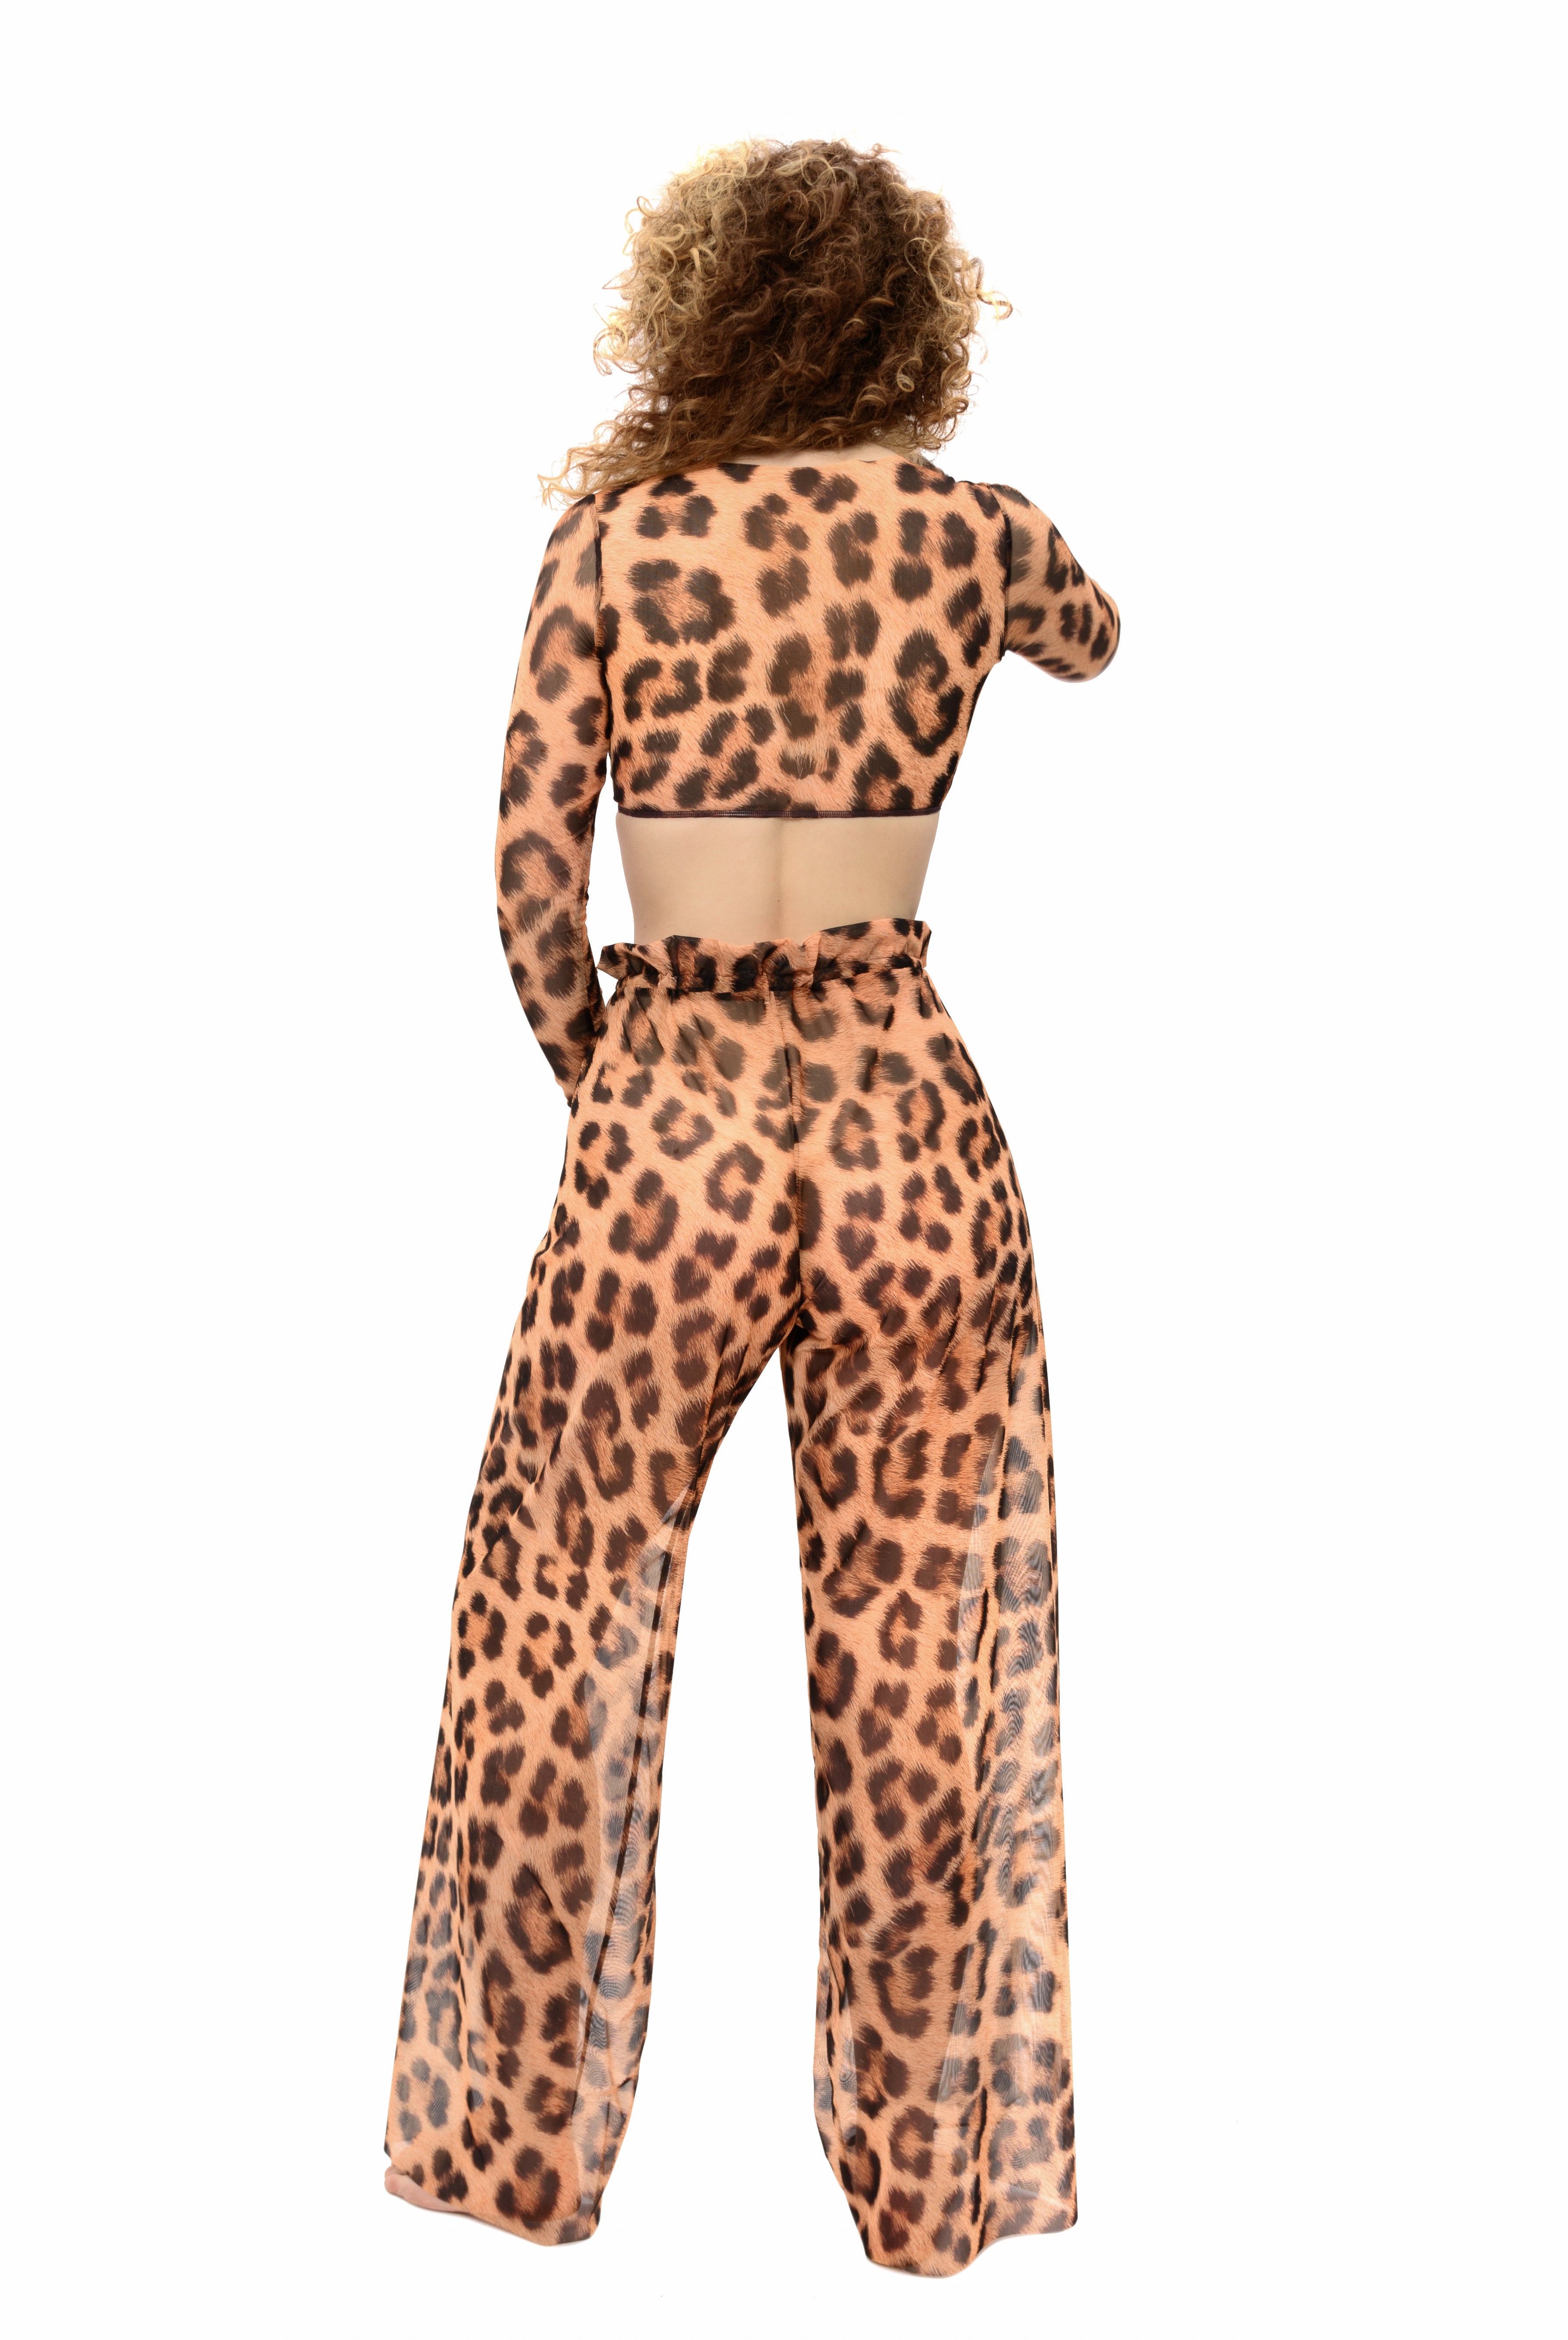 This file presents innovative sustainable tan-through smart swimwear featuring the iconic leopard print. Explore beach pants showcased on the runway, offering style and comfort for your vacation